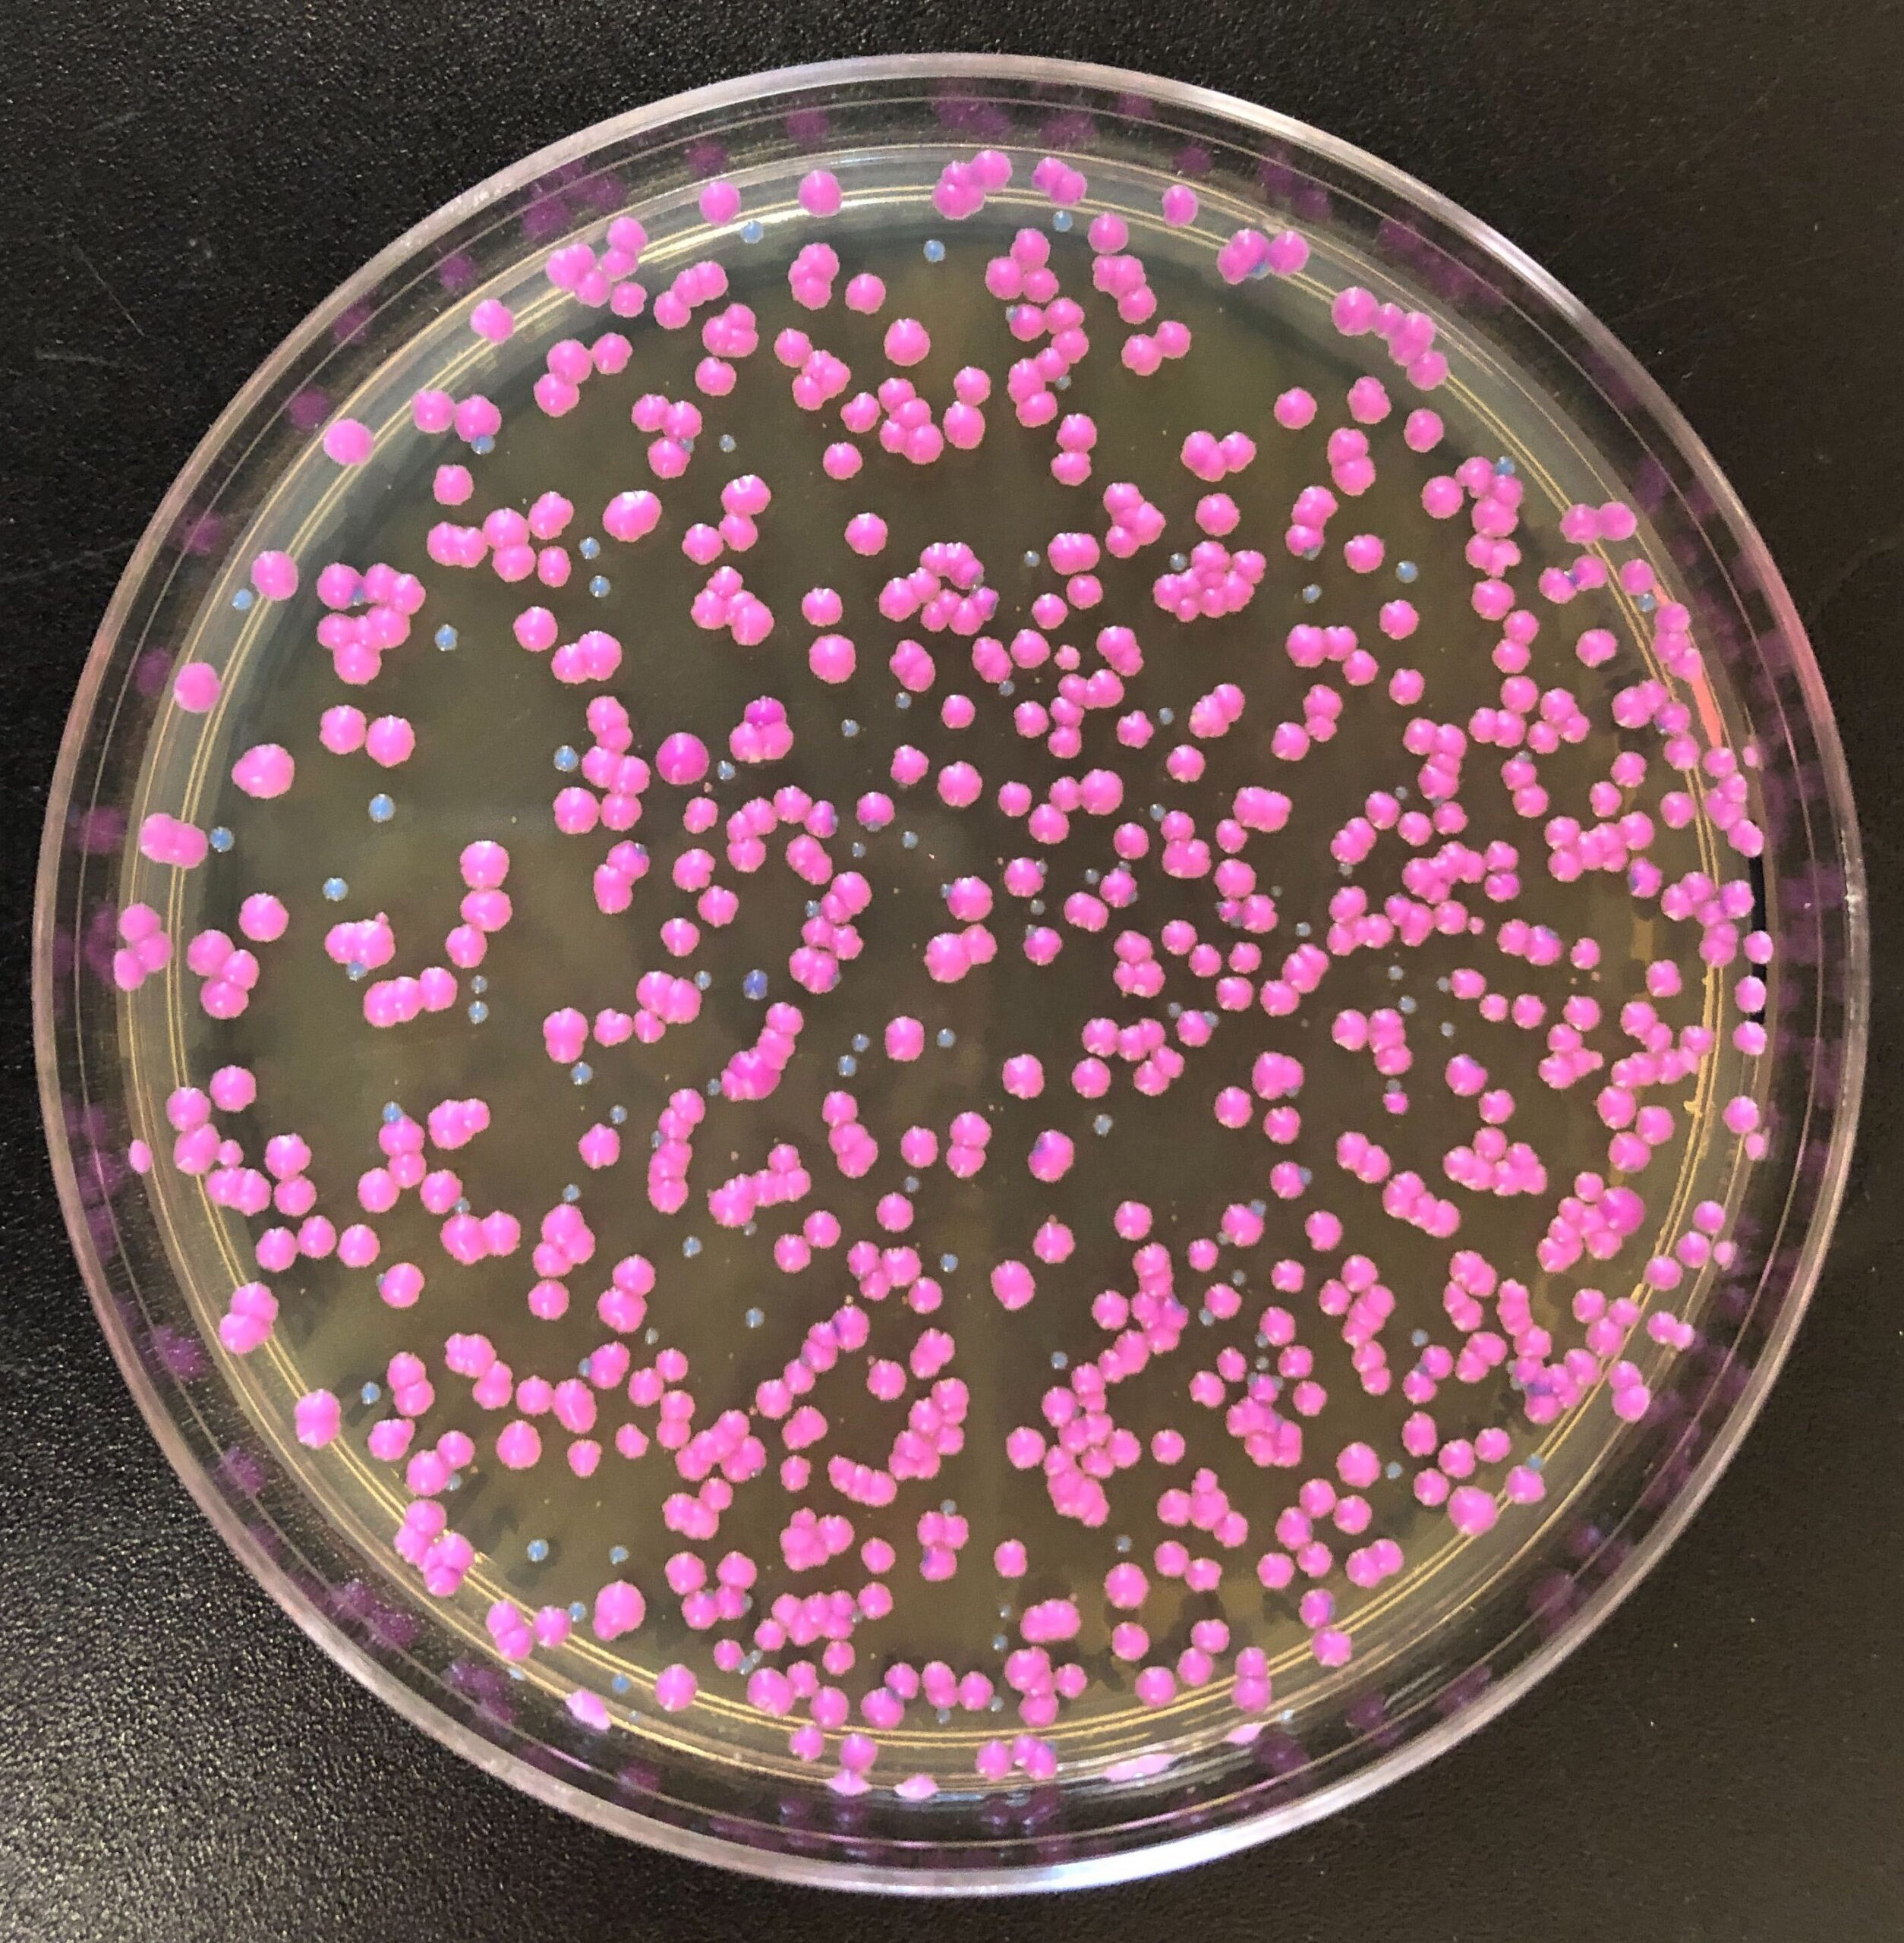 a Petri dish with colonies of pink and blue yeast